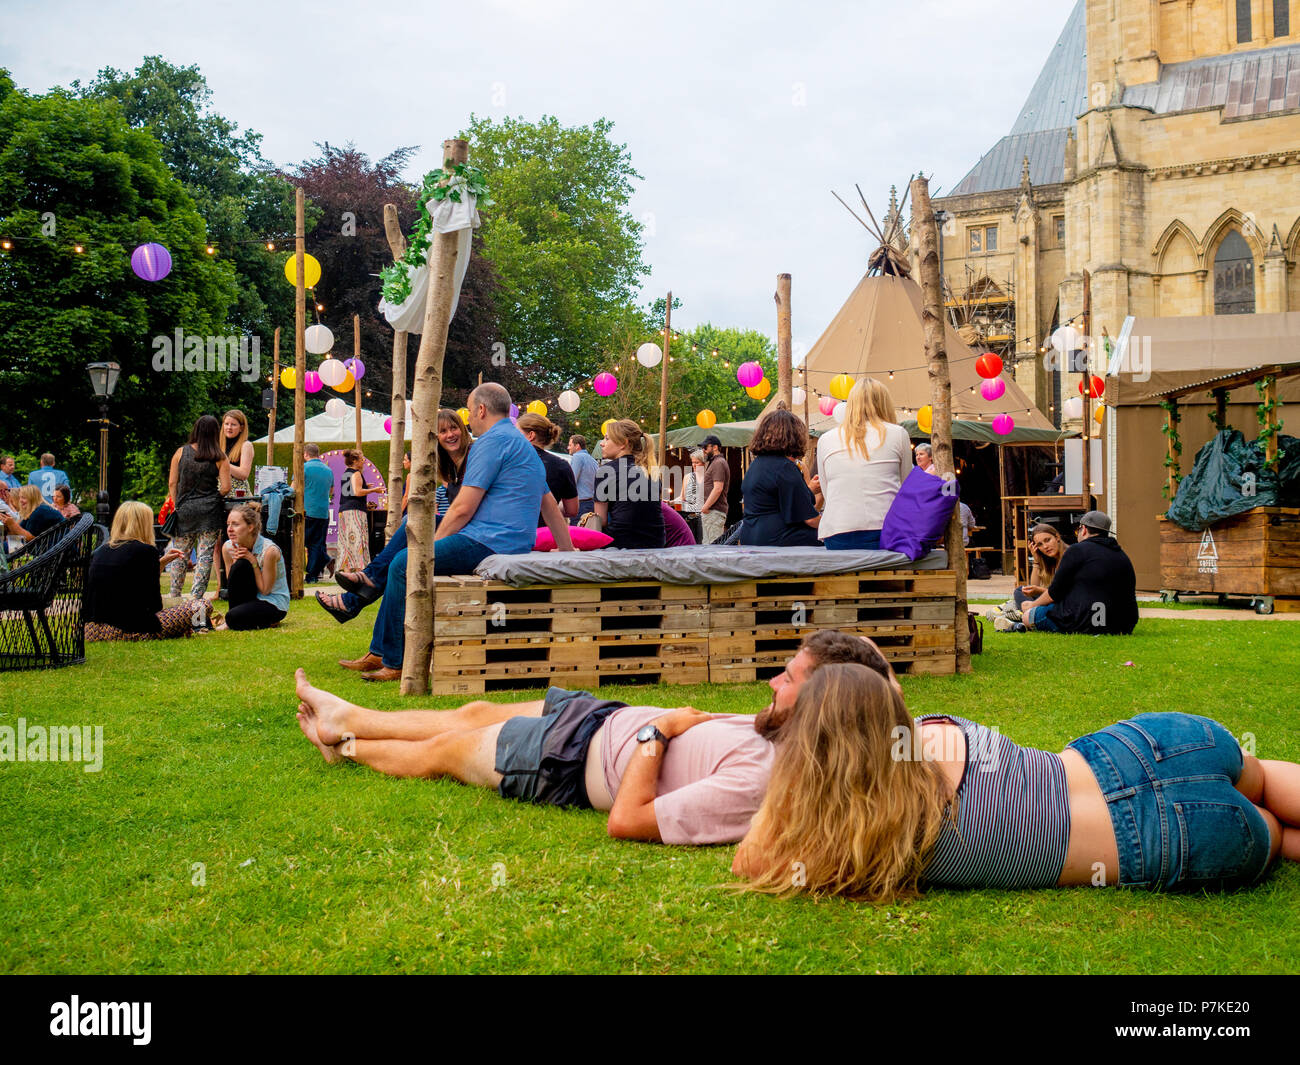 York, UK. 6th July 2018. SÓL ÁST – the pop-up bar with a summery vibe – begins a two month residency in the shadows of York Minster. Two linked canvas tipis adorned with greenery and lanterns form the unique venue, combining indoor cosiness with a unique summer theme set against one of the world’s most spectacular gothic backdrops. The event is part of the “Summer in the Park: Heart of Yorkshire” festival that is being hosted the Dean’s Park by York Minster throughout the summer. Credit: Bailey-Cooper Photography/Alamy Live News Stock Photo